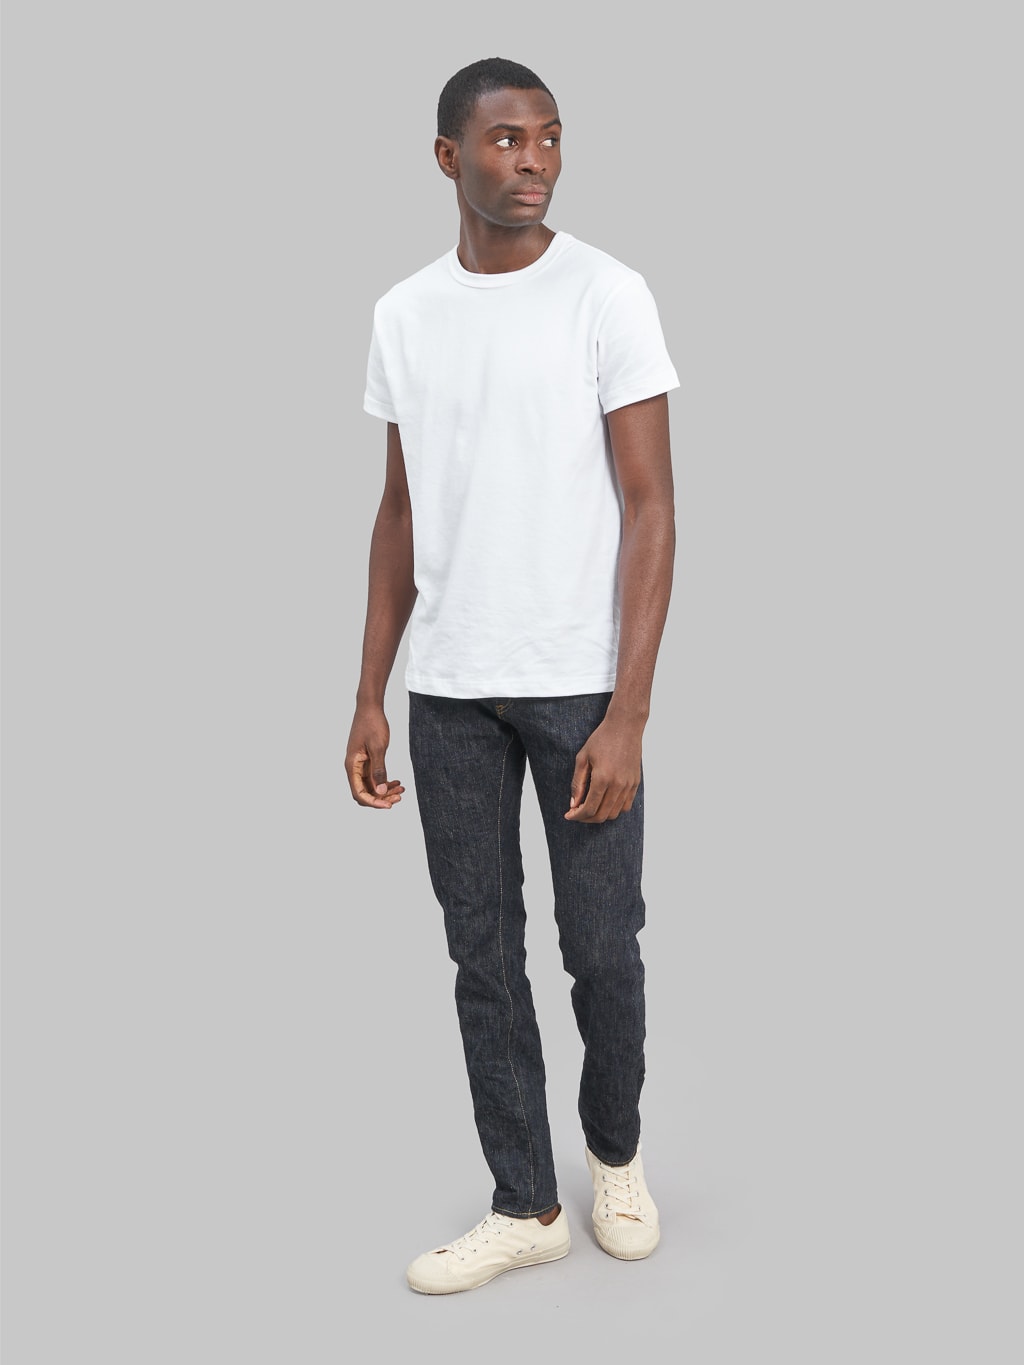 Oni denim kihannen relaxed tapered jeans model front fit